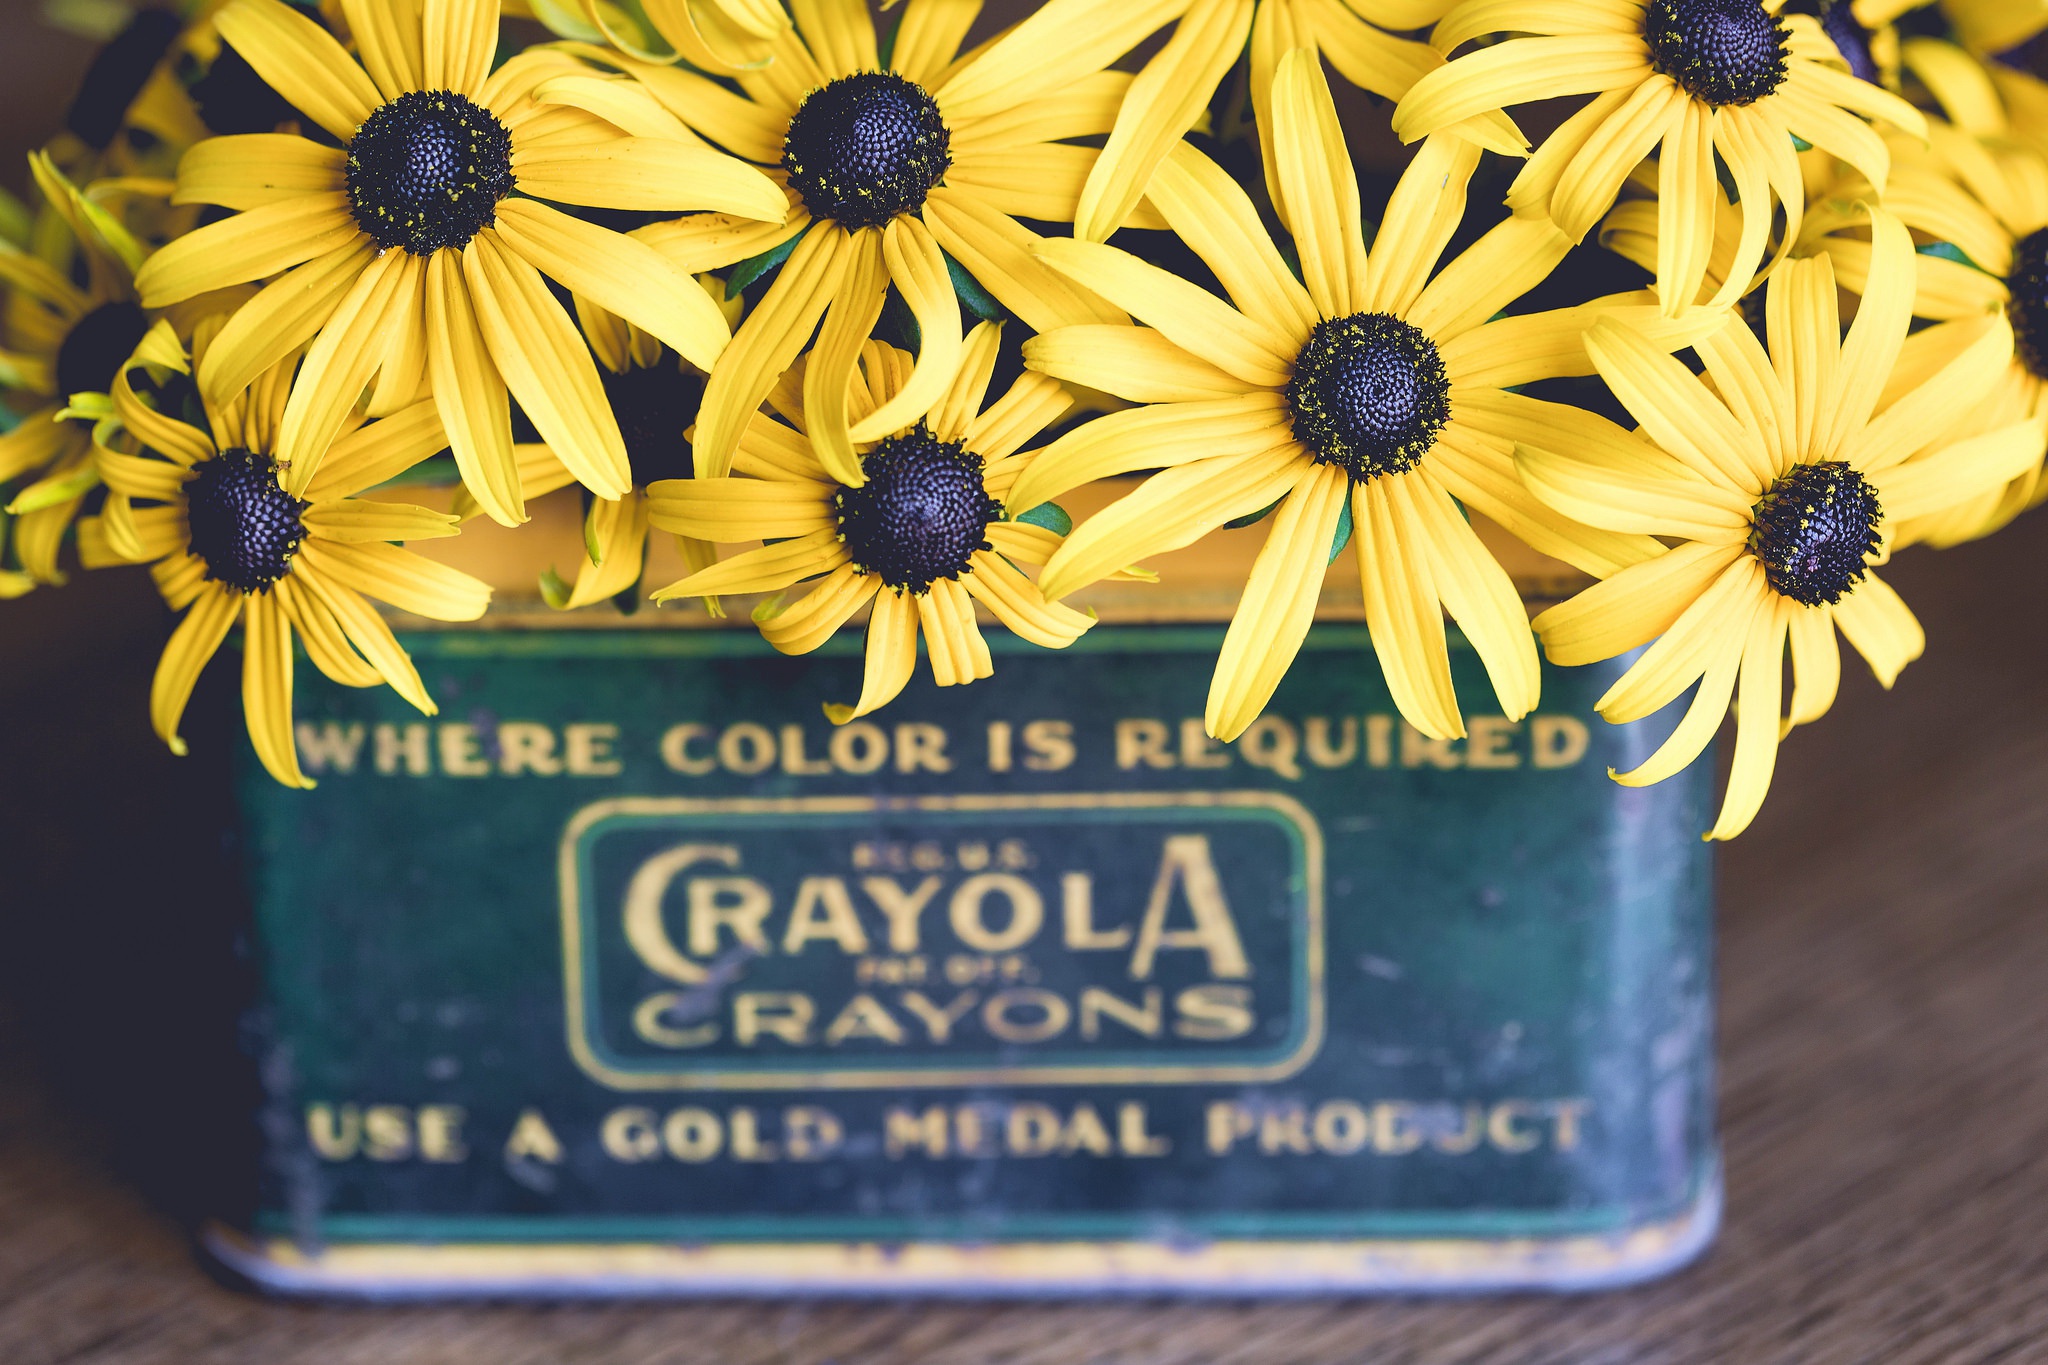 General 2048x1365 plants boxes yellow flowers flowers closeup